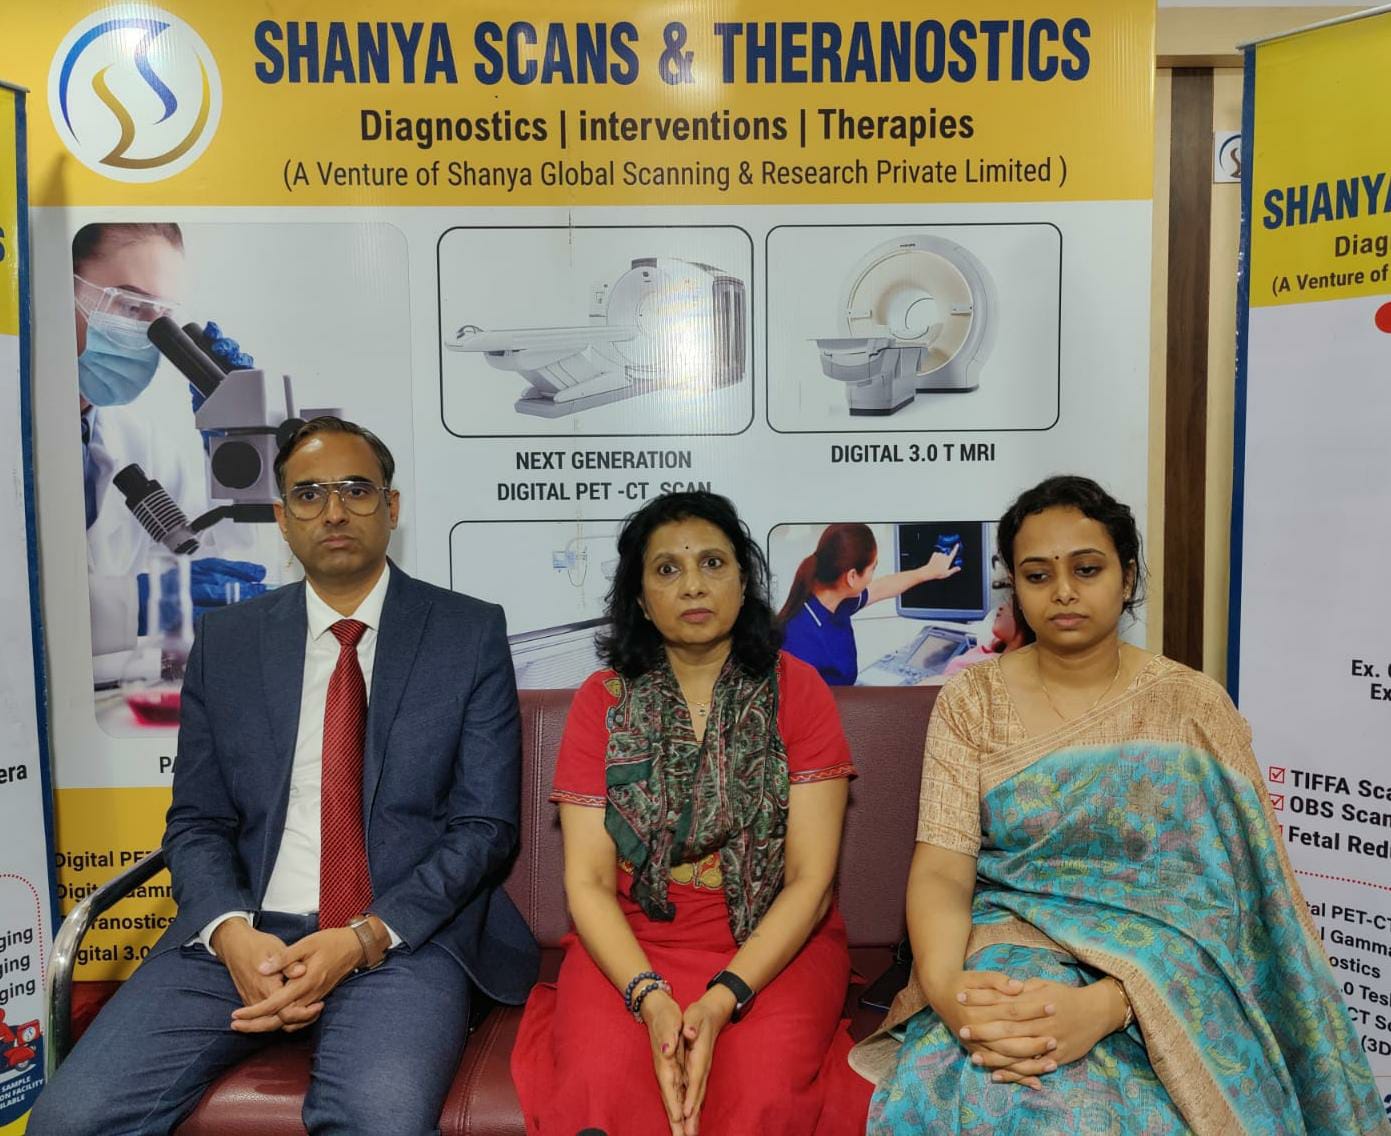 Shanya Scans and Theranostics Hosted Innovative Workshop in Partnership with Samsung the theme was on-site Simulator-Based 2D Ultrasound Training Course in Gynecology and Early Pregnancy